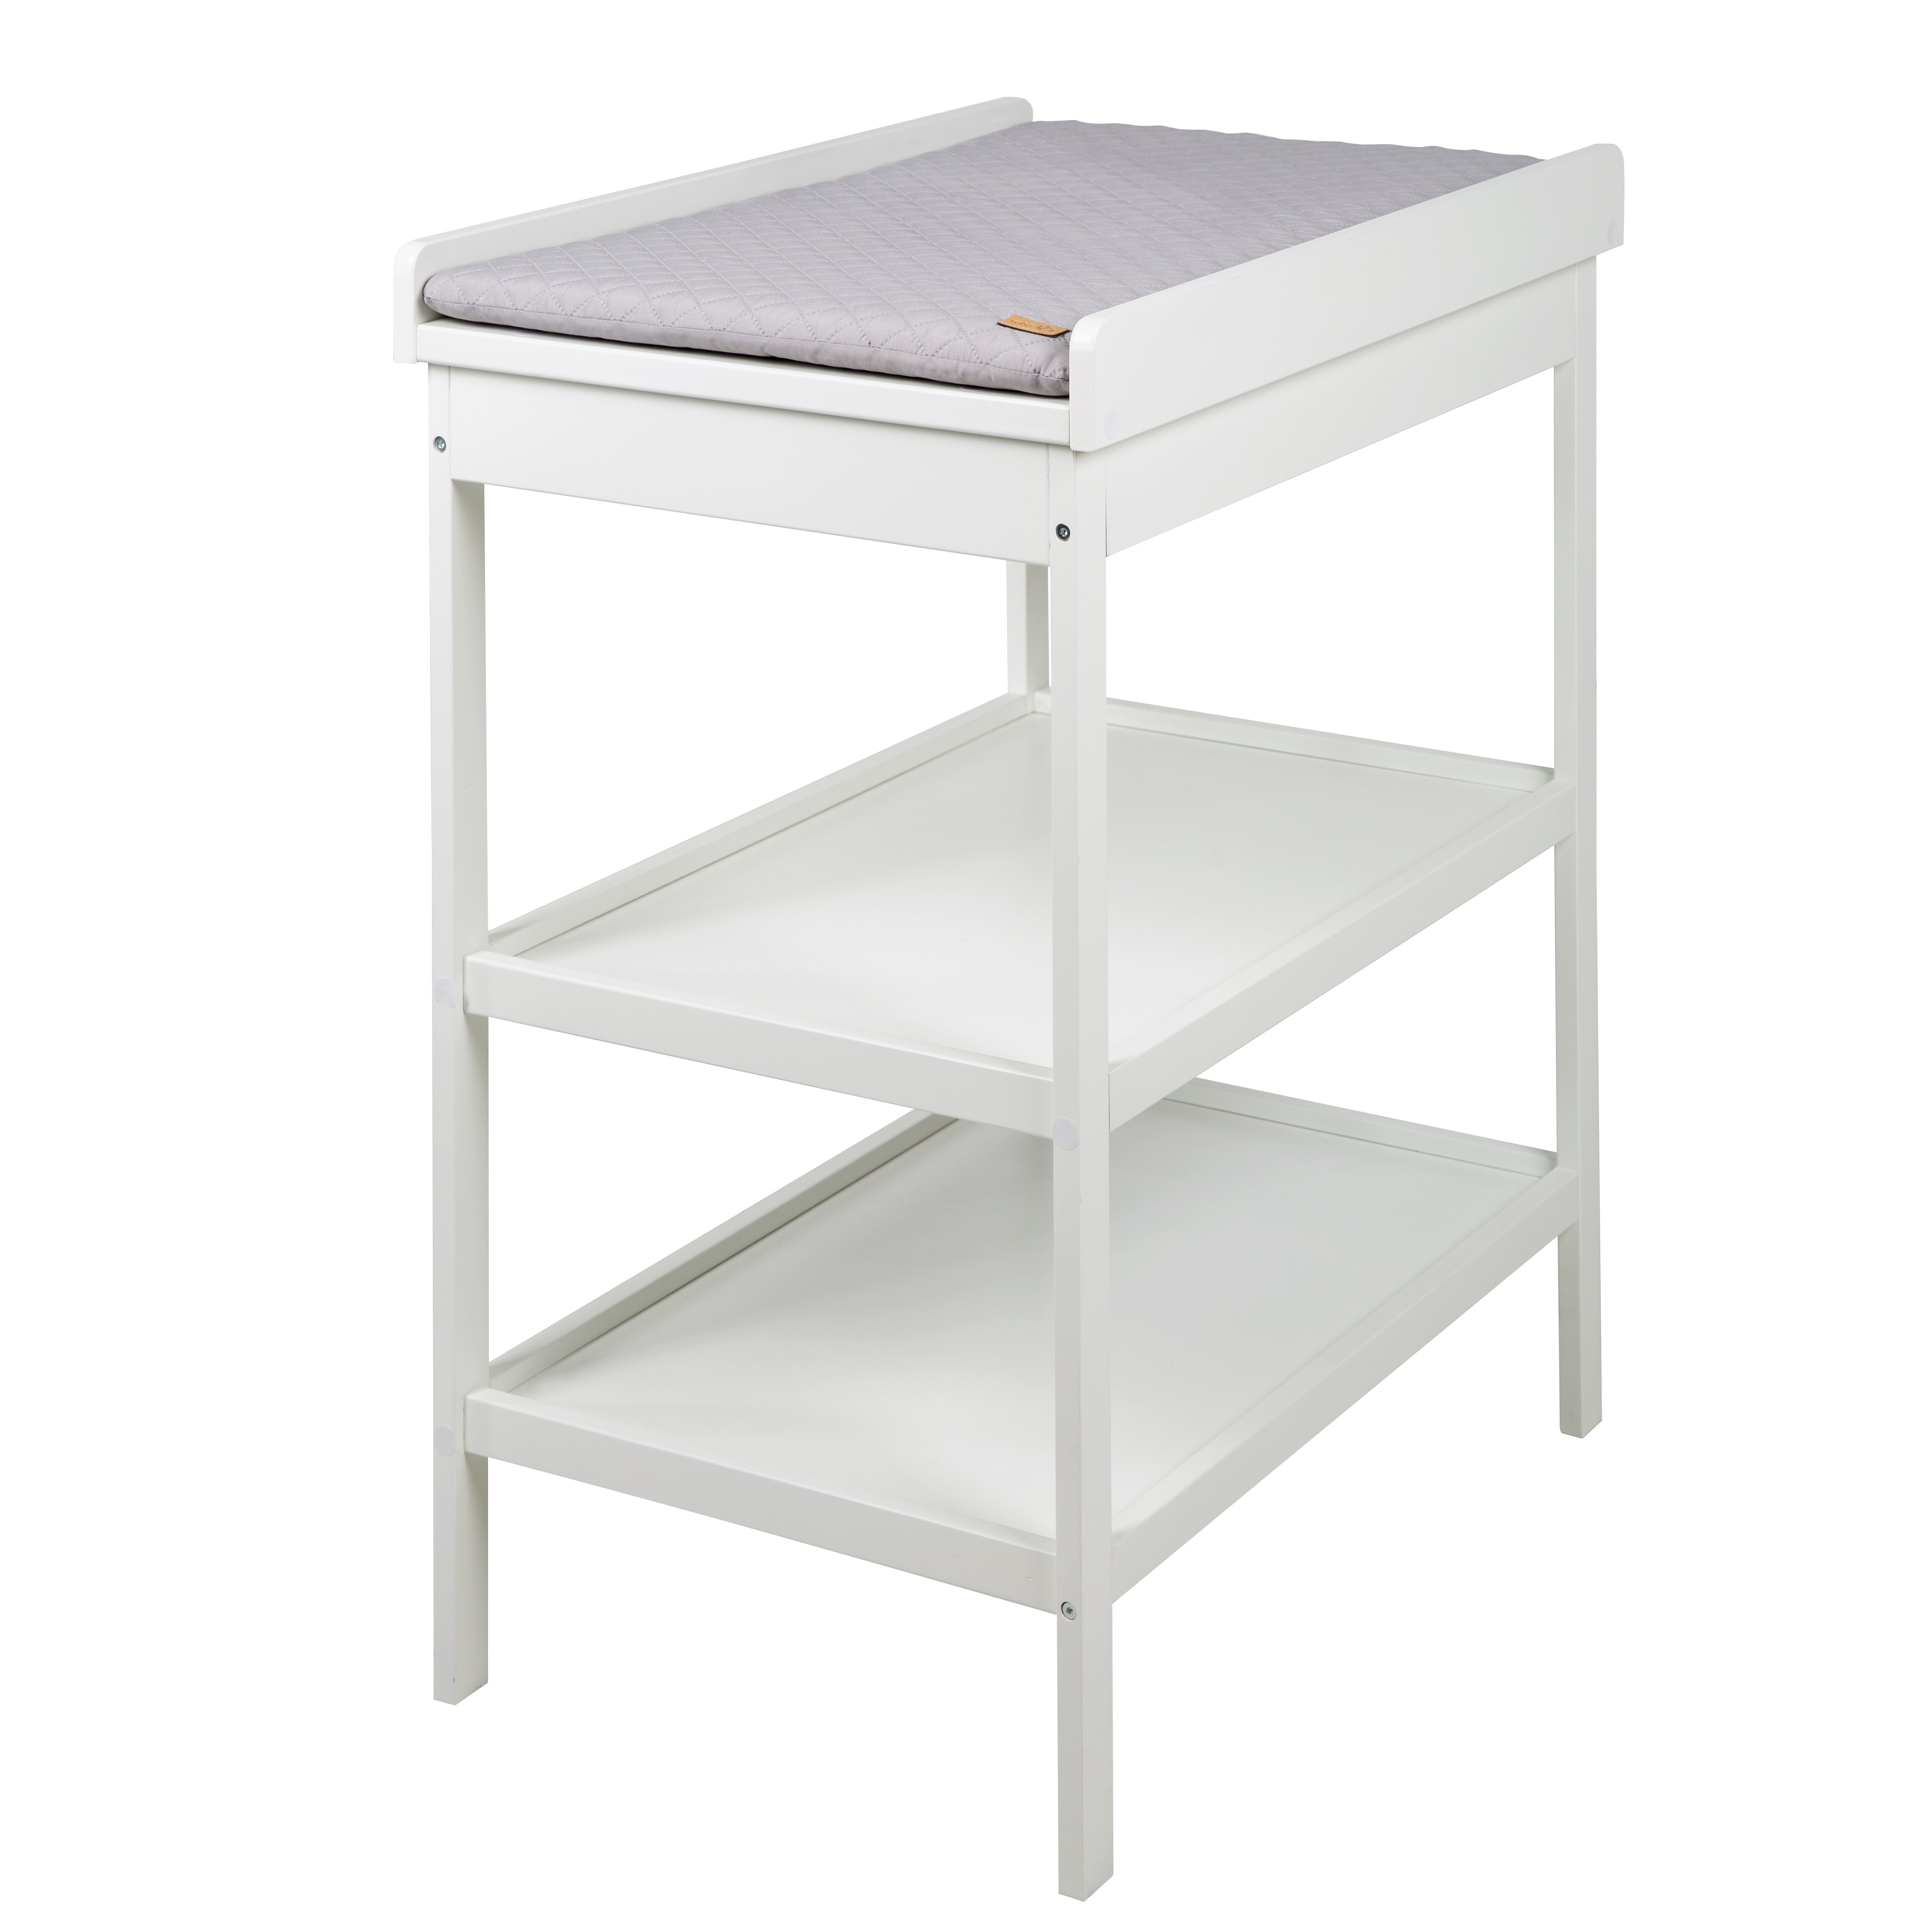 space saving baby changing table